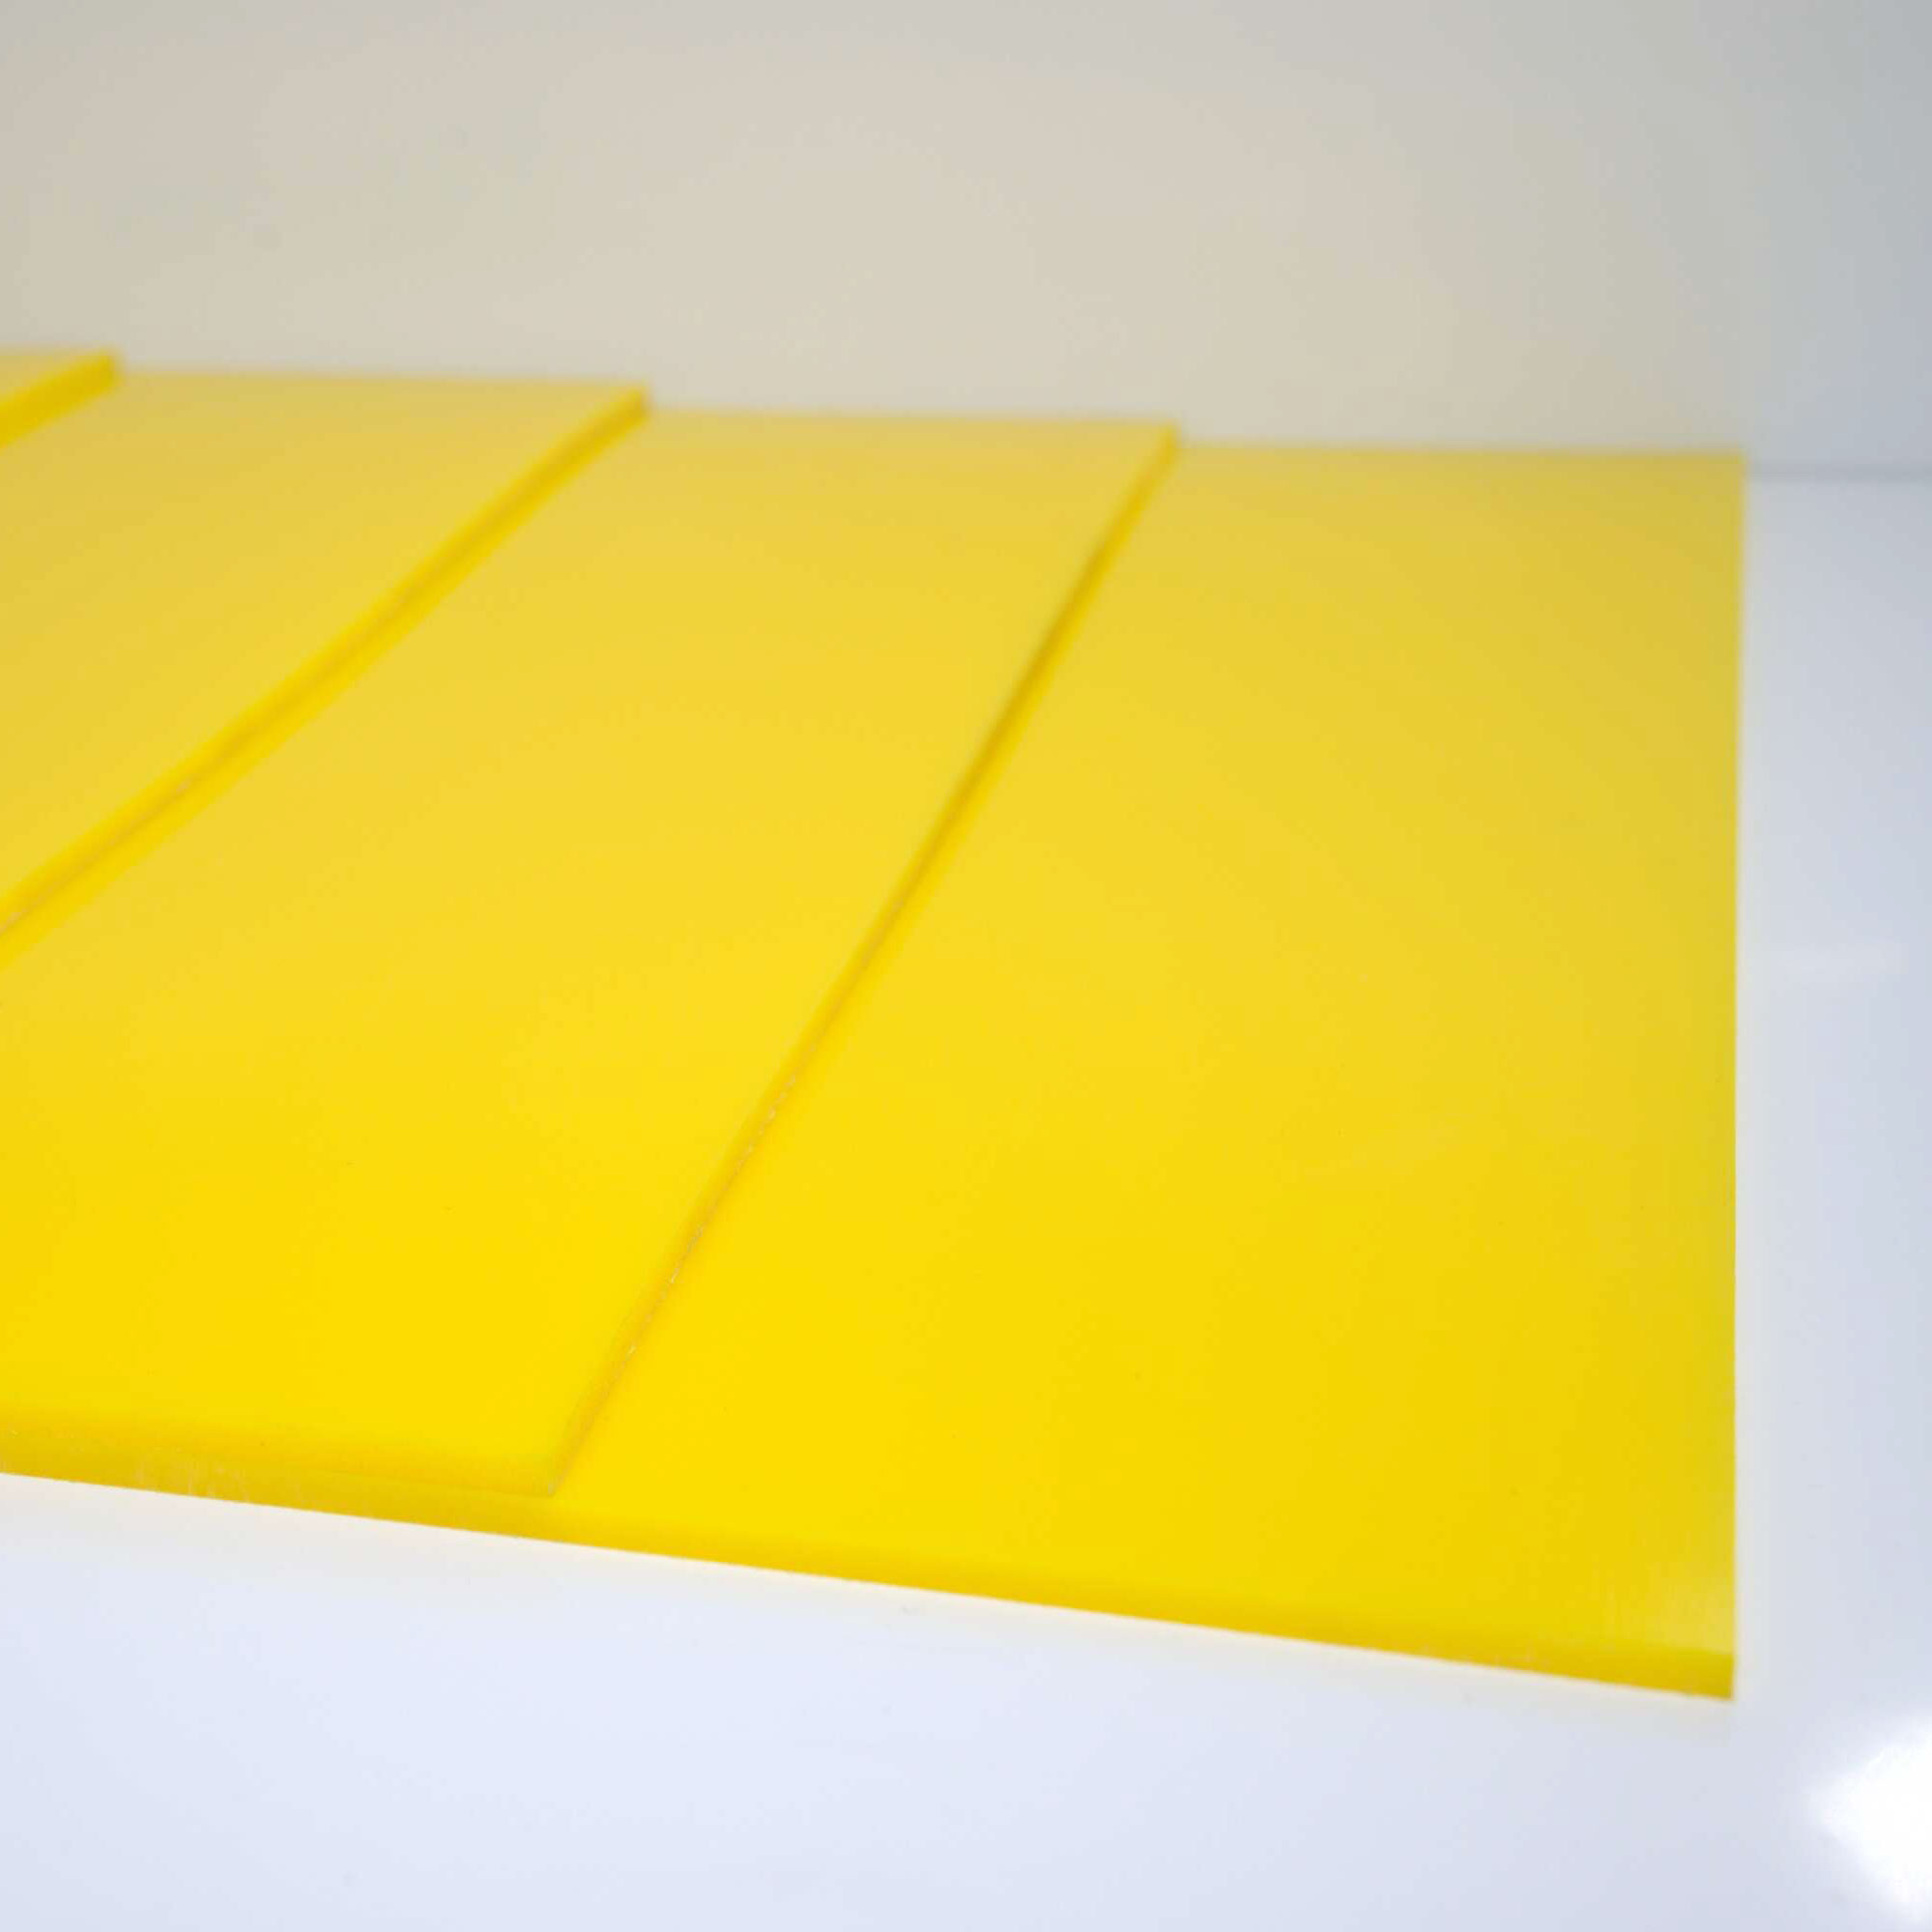 From Strength to Versatility: Exploring Polyurethane Sheets